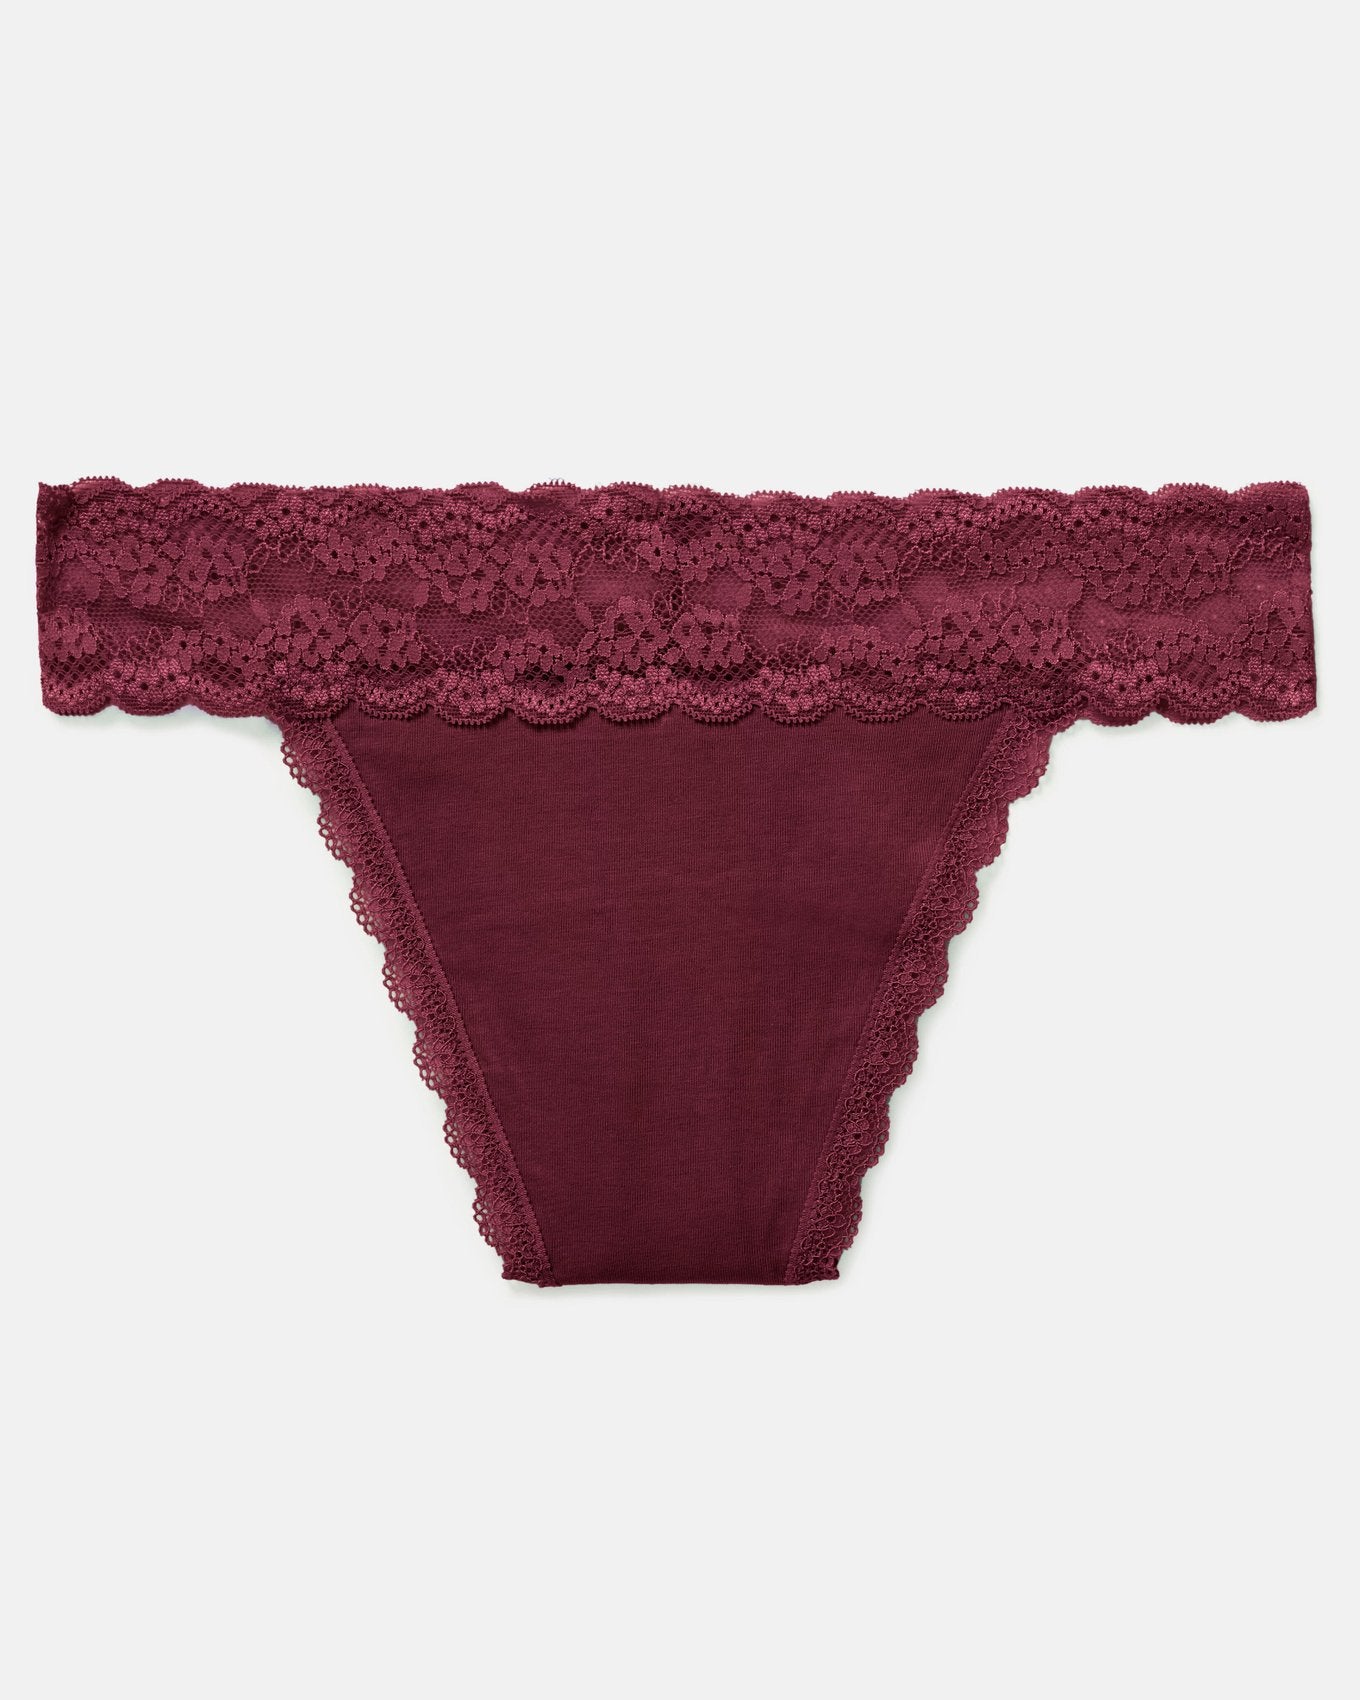 Joyja Lily period-proof panty in color Windsor Wine and shape thong